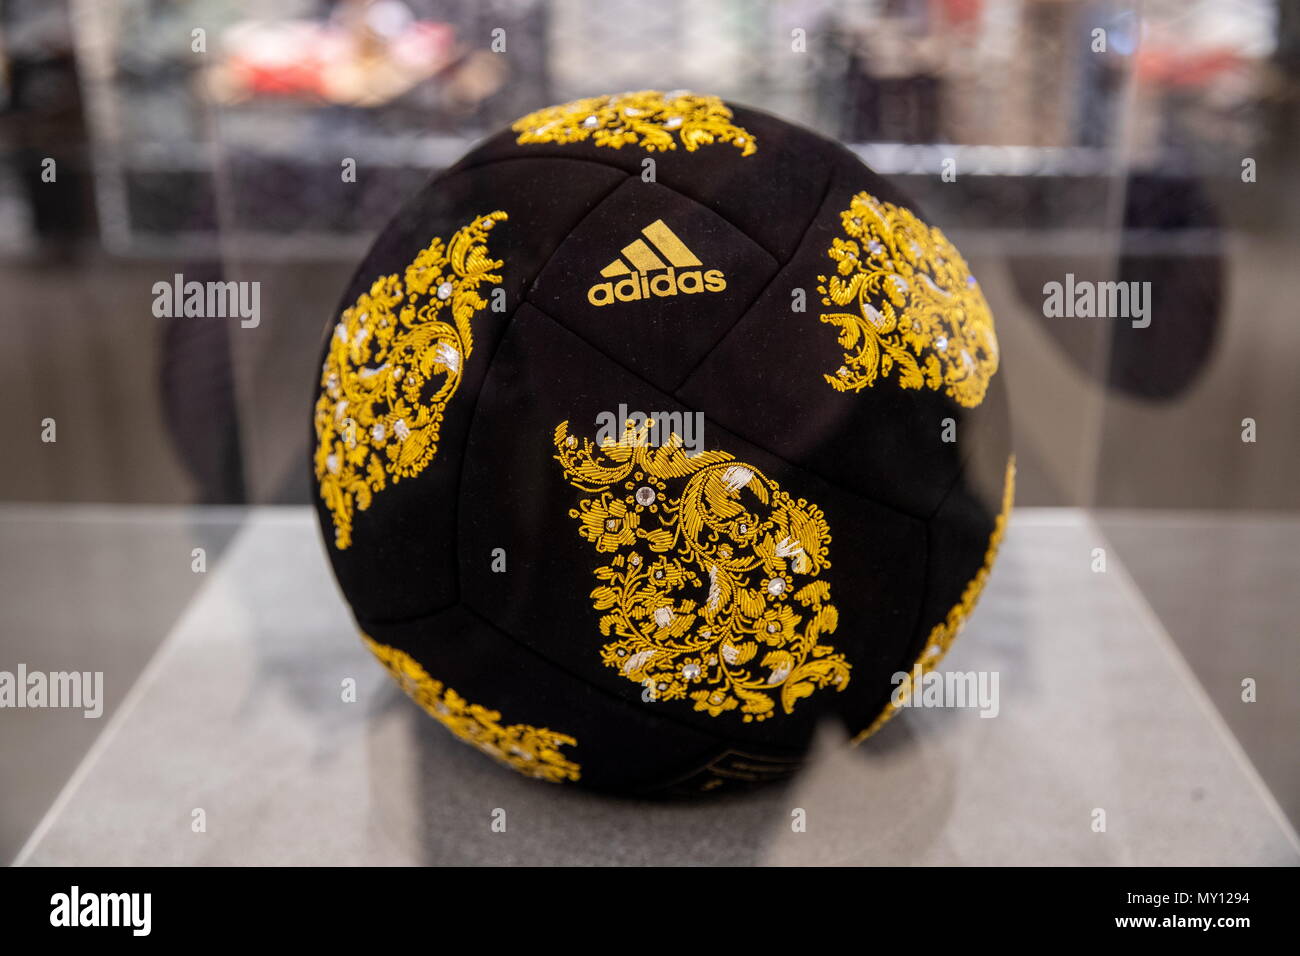 Page 3 - Adidas World Cup Ball High Resolution Stock Photography and Images  - Alamy